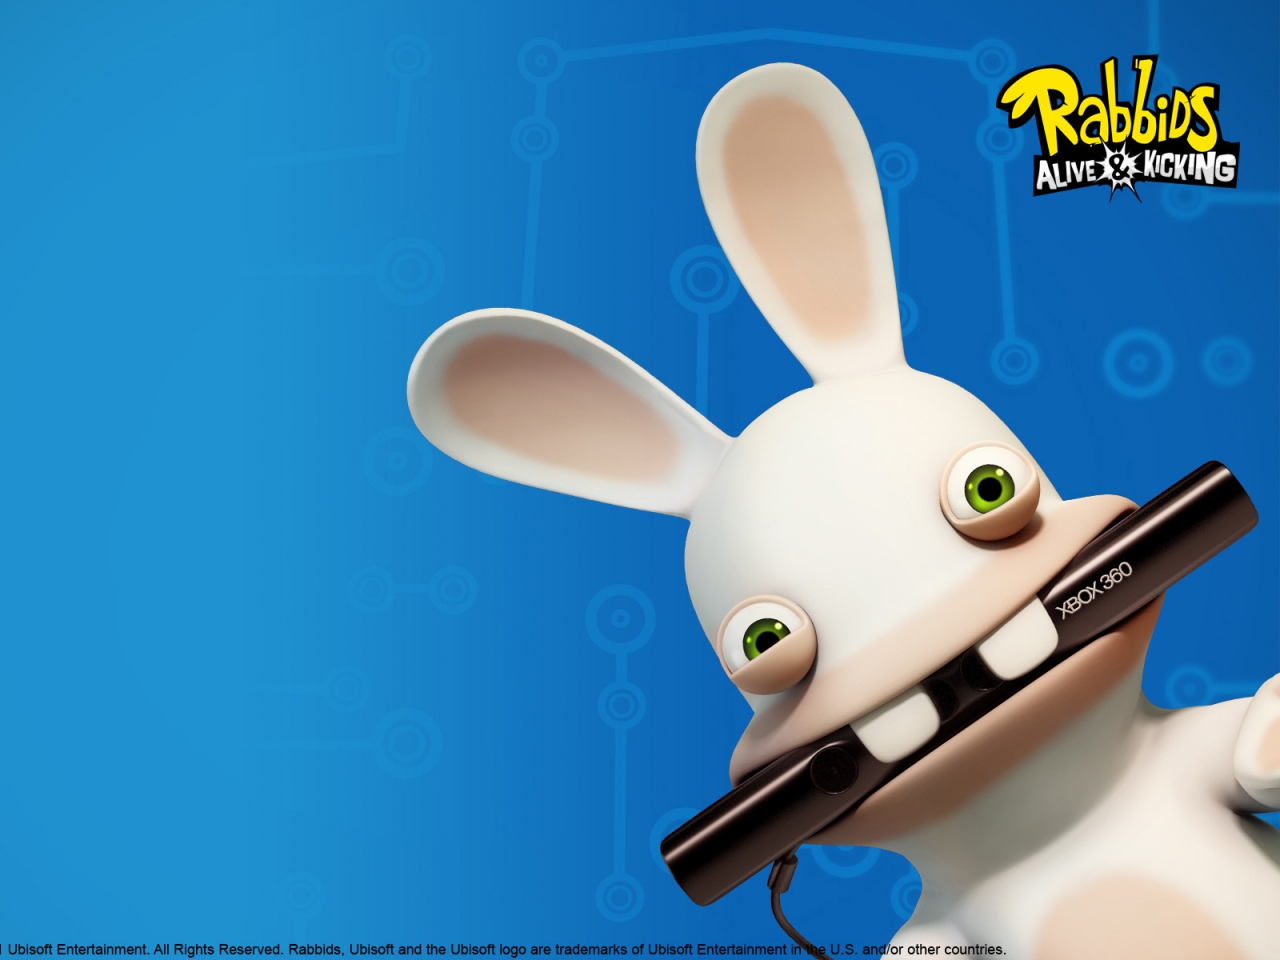 Rabbids Alive and Kicking for 1280 x 960 resolution